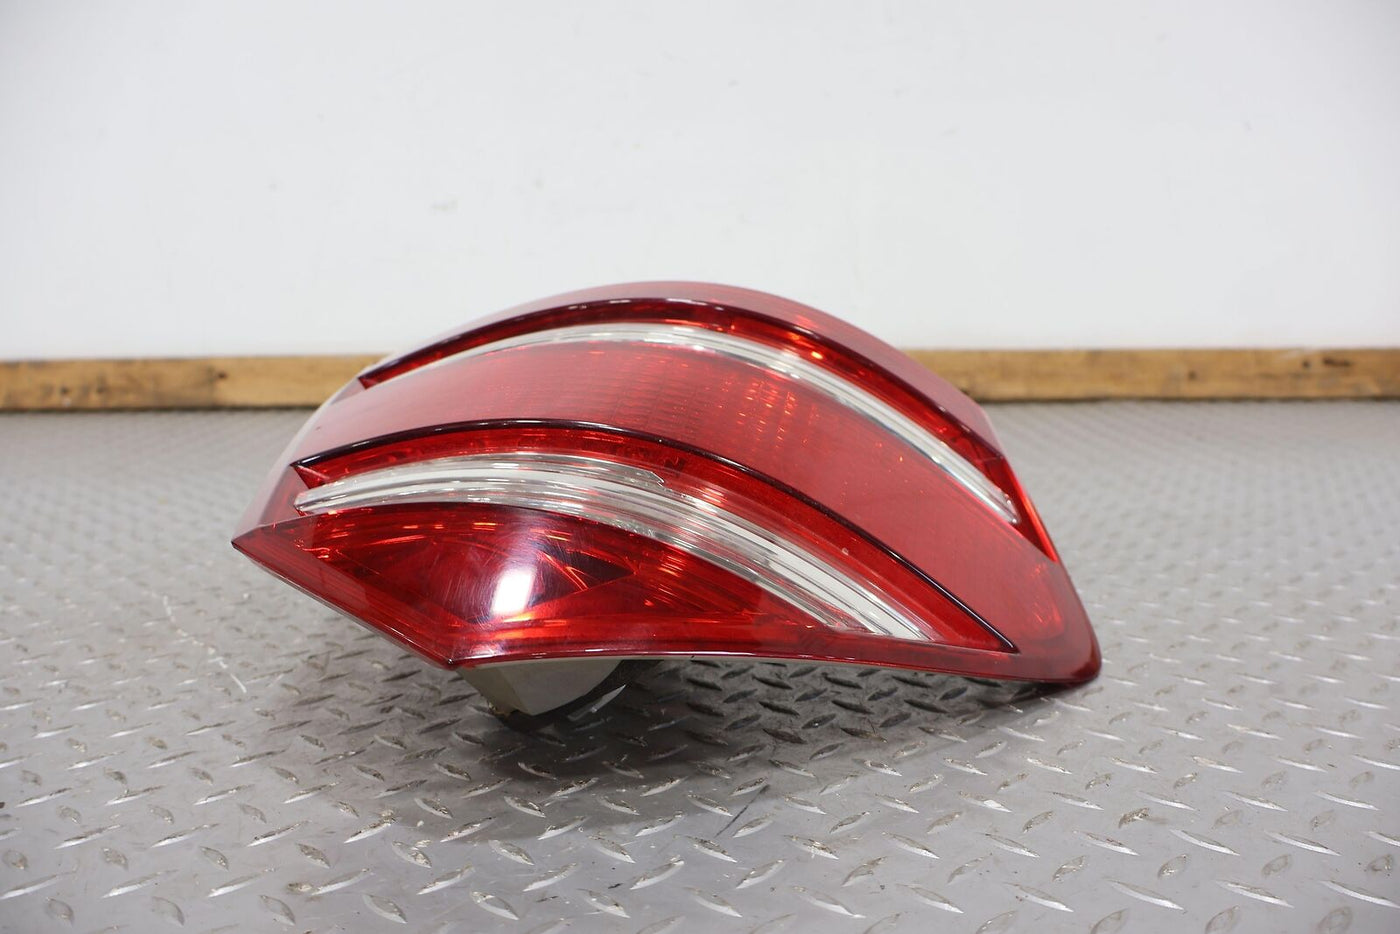 07-09 Mercedes GL450 Left LH Upper Tail Light Lamp (Tested) Repaired Tab